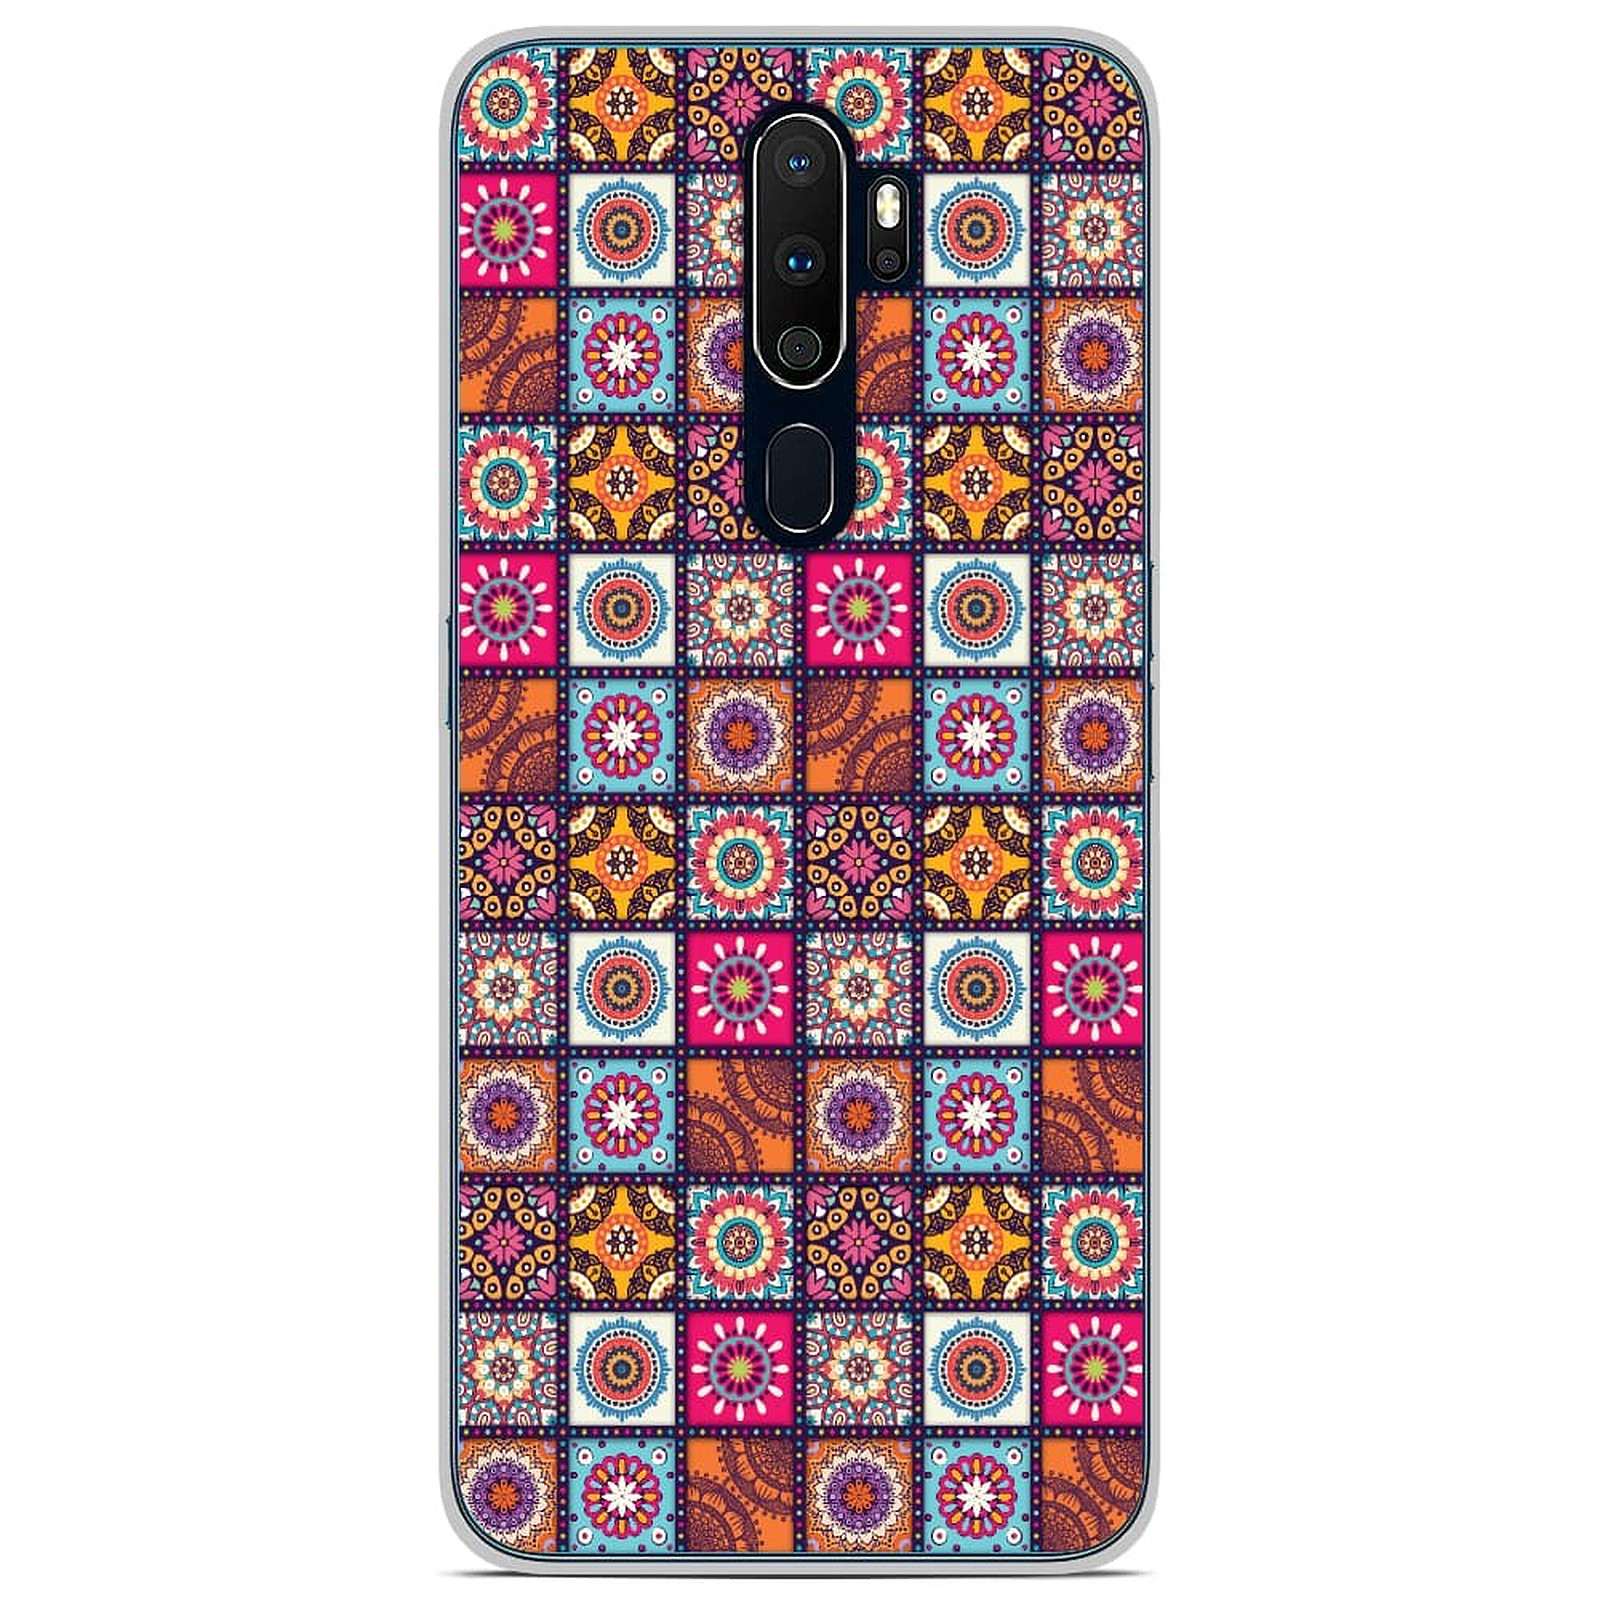 1001 Coques Coque silicone gel Oppo A5 2020 motif Patchwork Mandala - Coque telephone 1001Coques